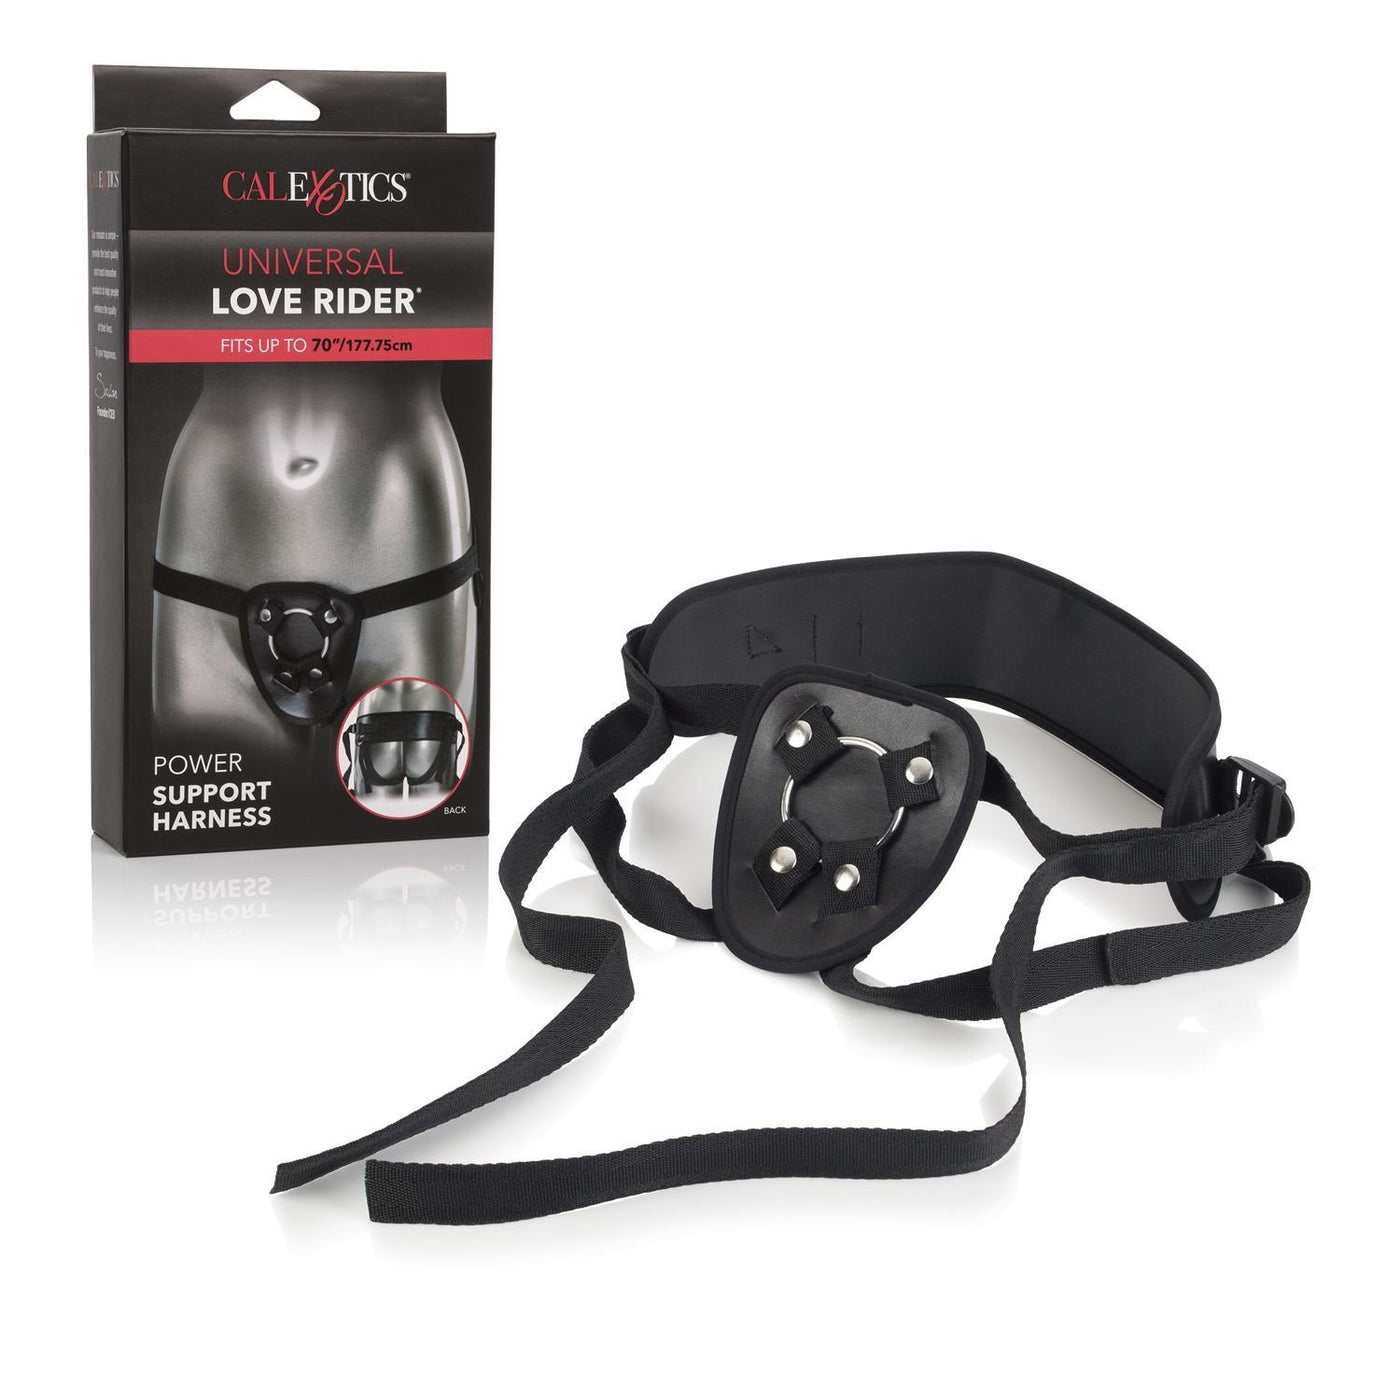 Universal Love Rider Power Support Harness More Toys CalExotics 